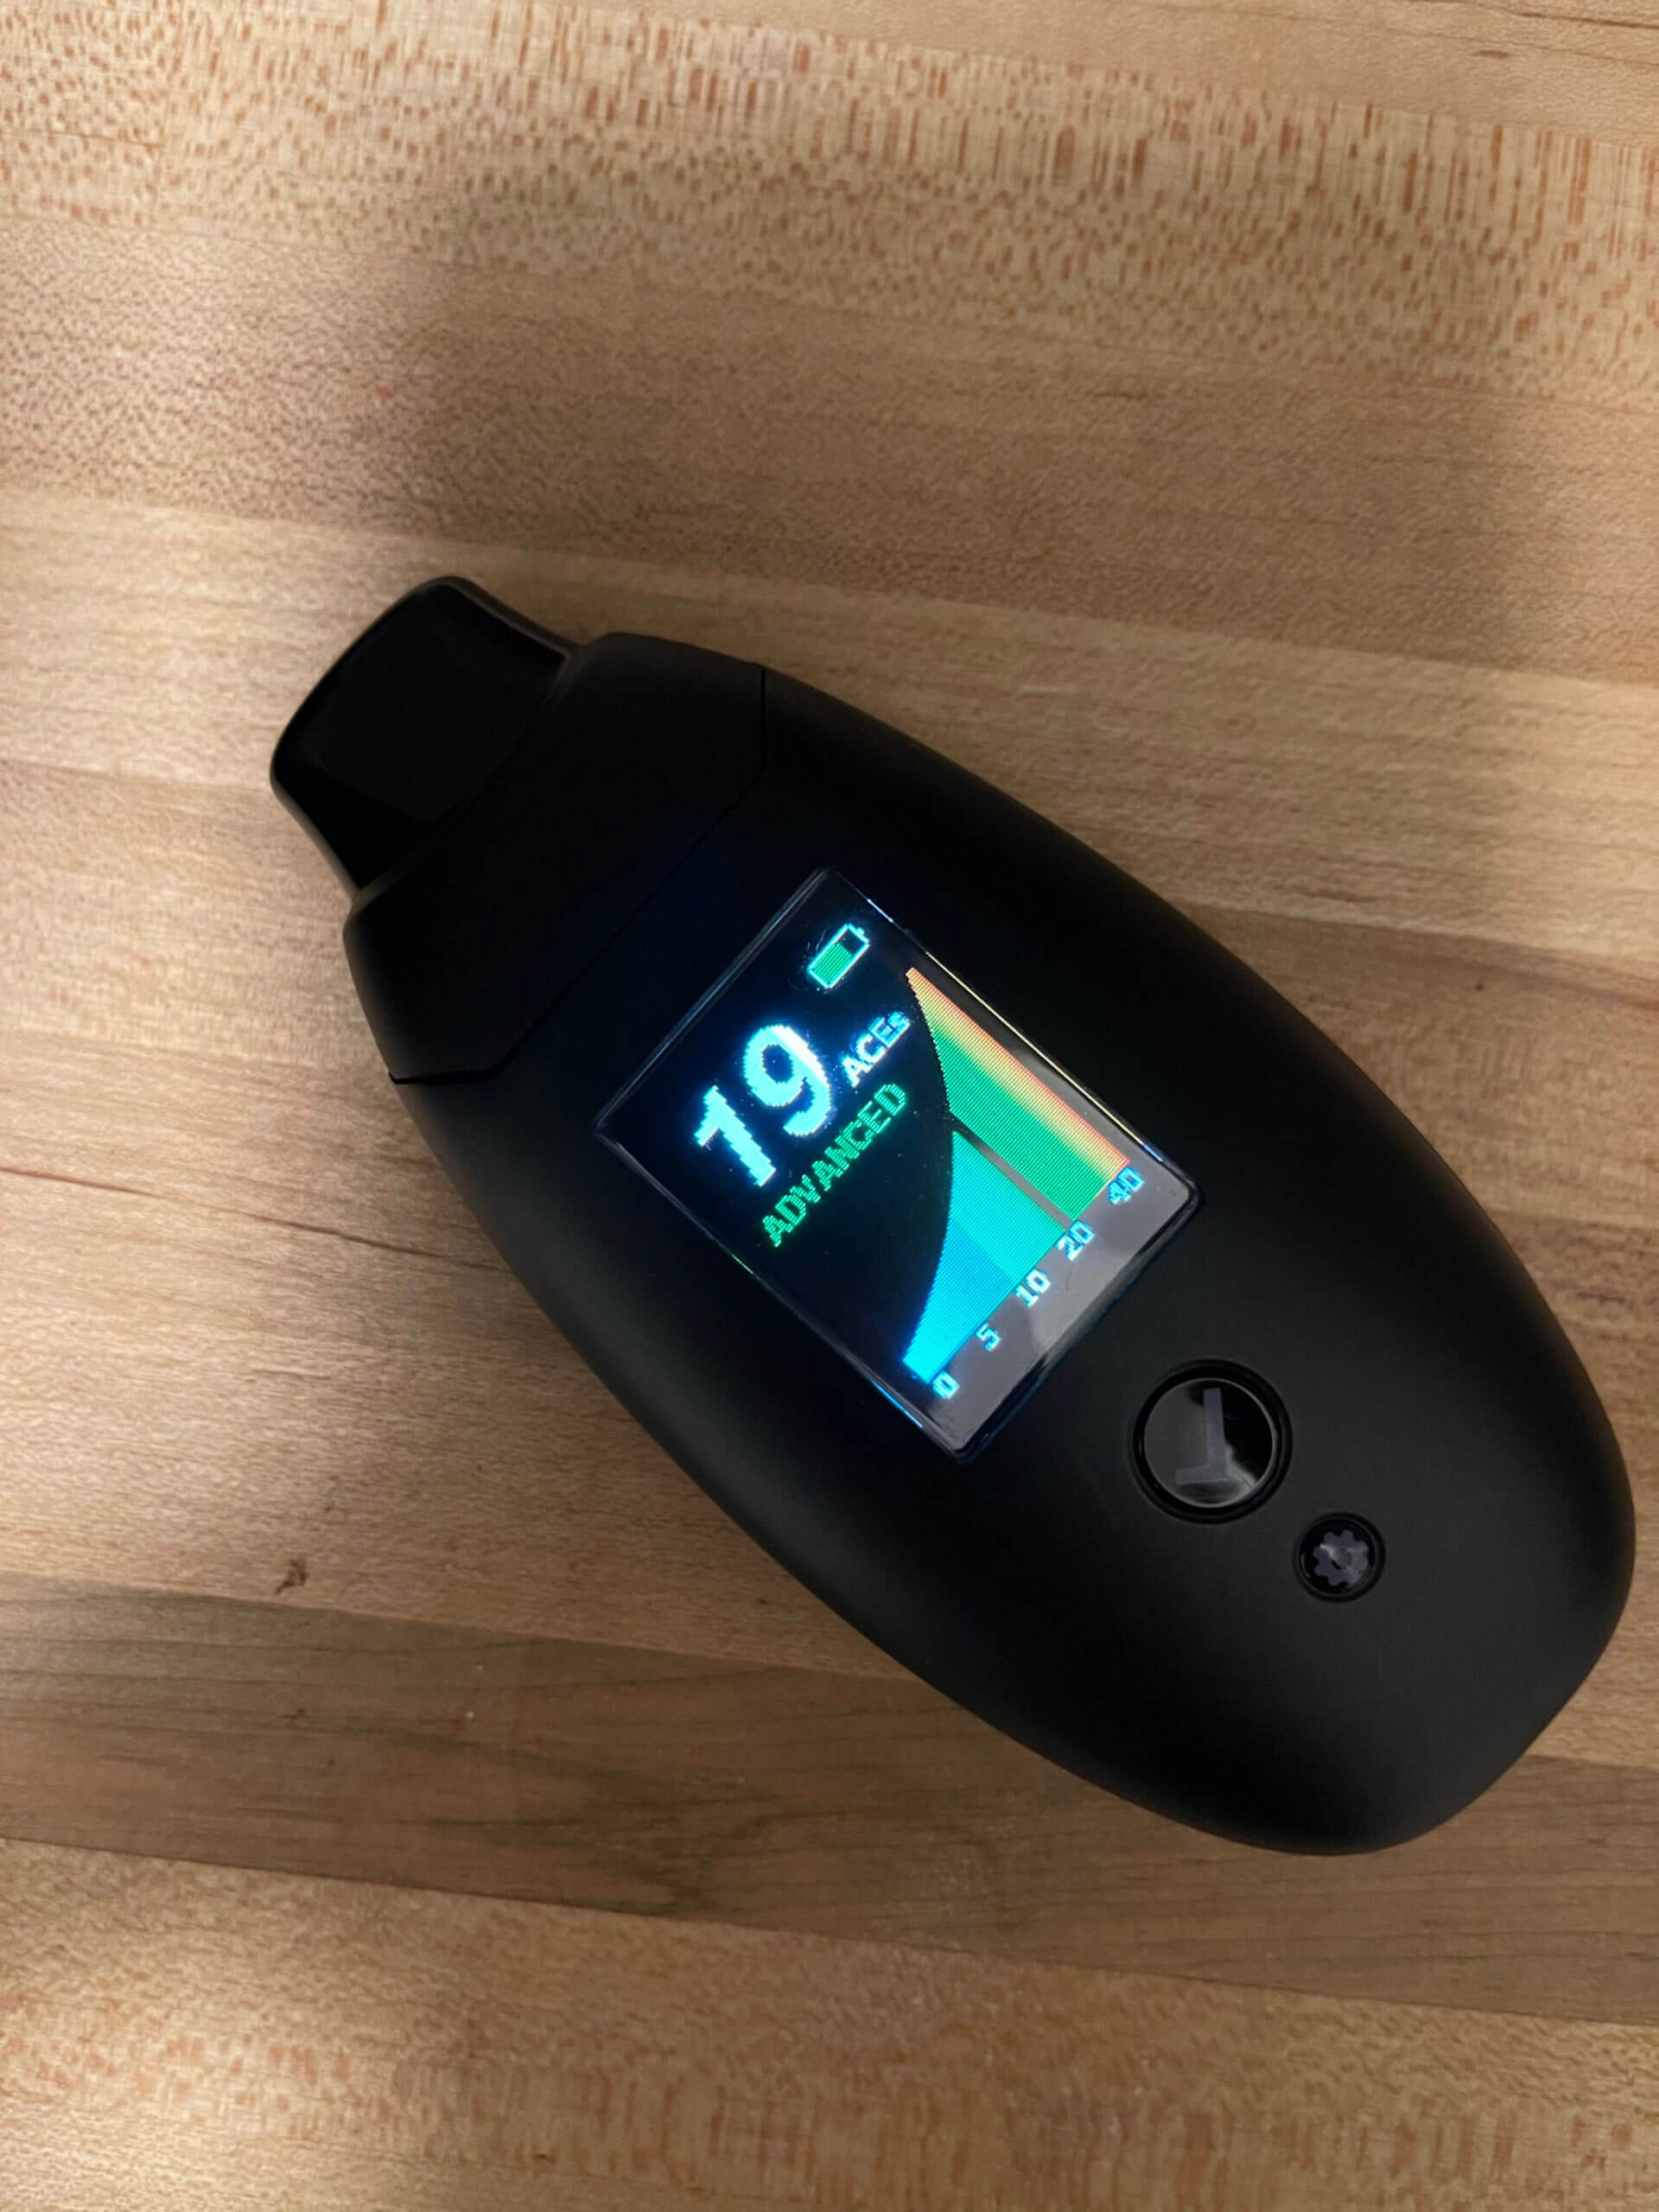 Biosense Review: Why It's the Best Ketone Breath Meter on the Market